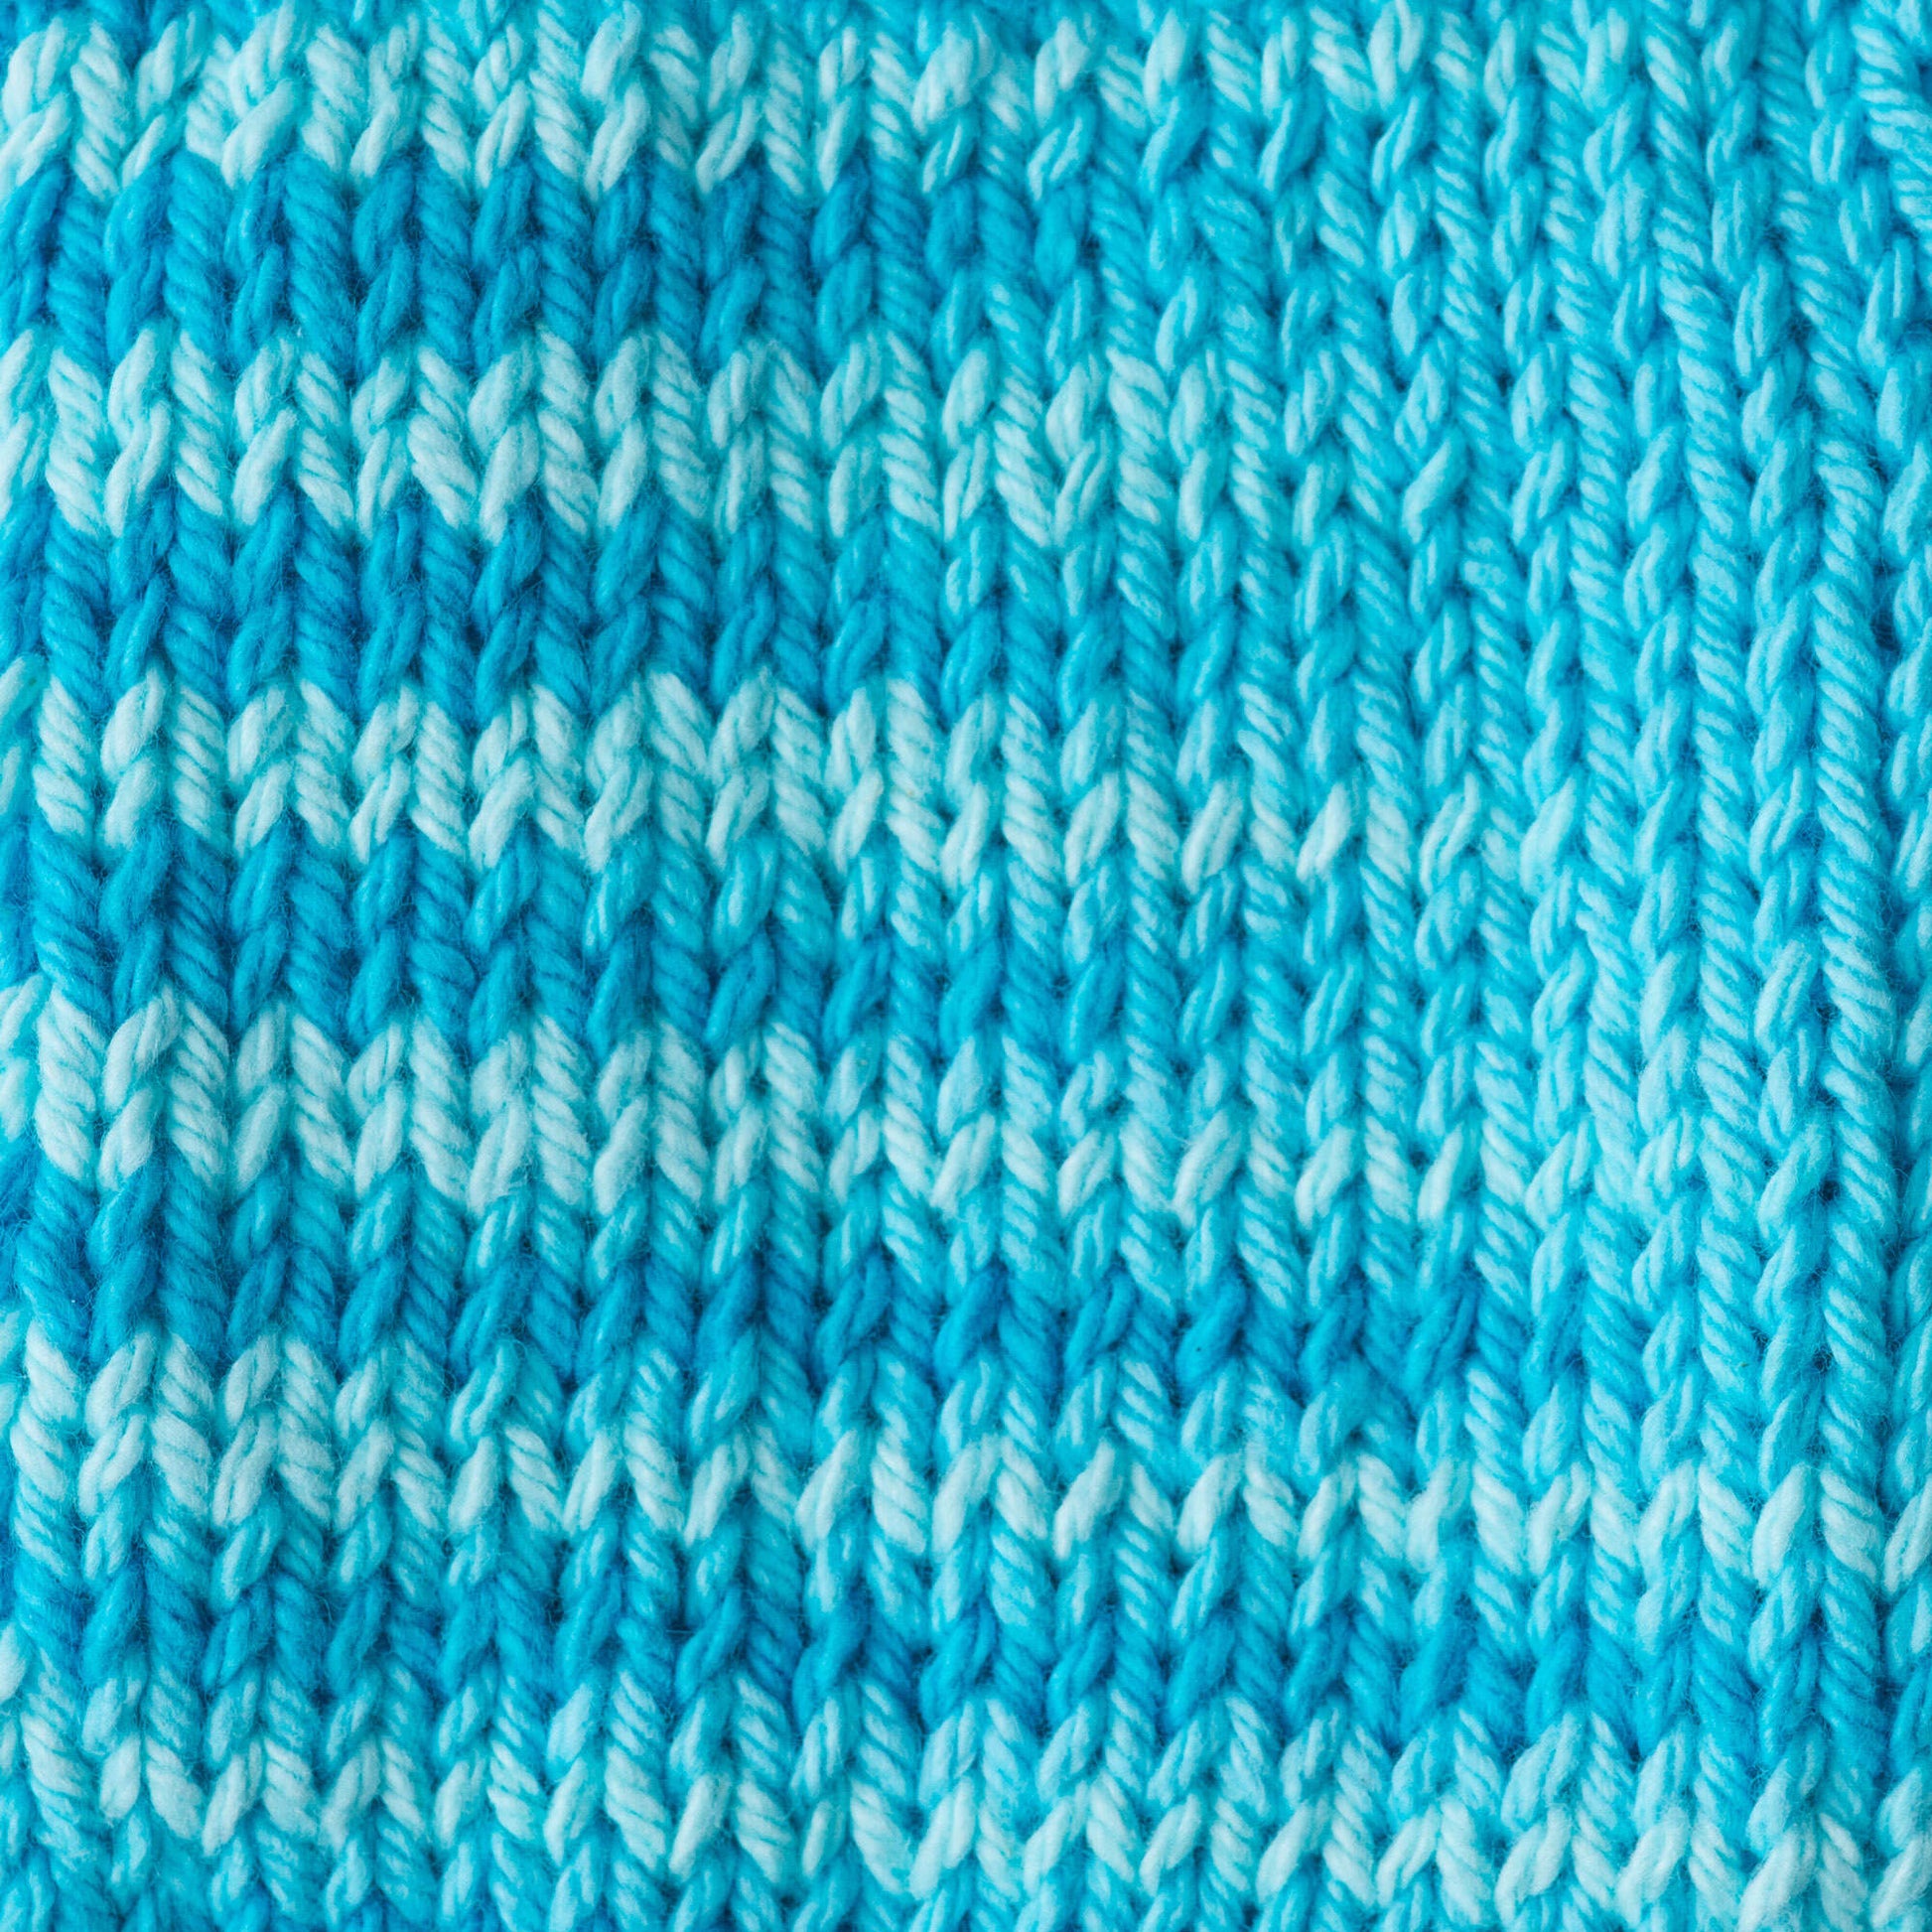 Lily Sugar'n Cream Super Size Ombres Yarn Swimming Pool